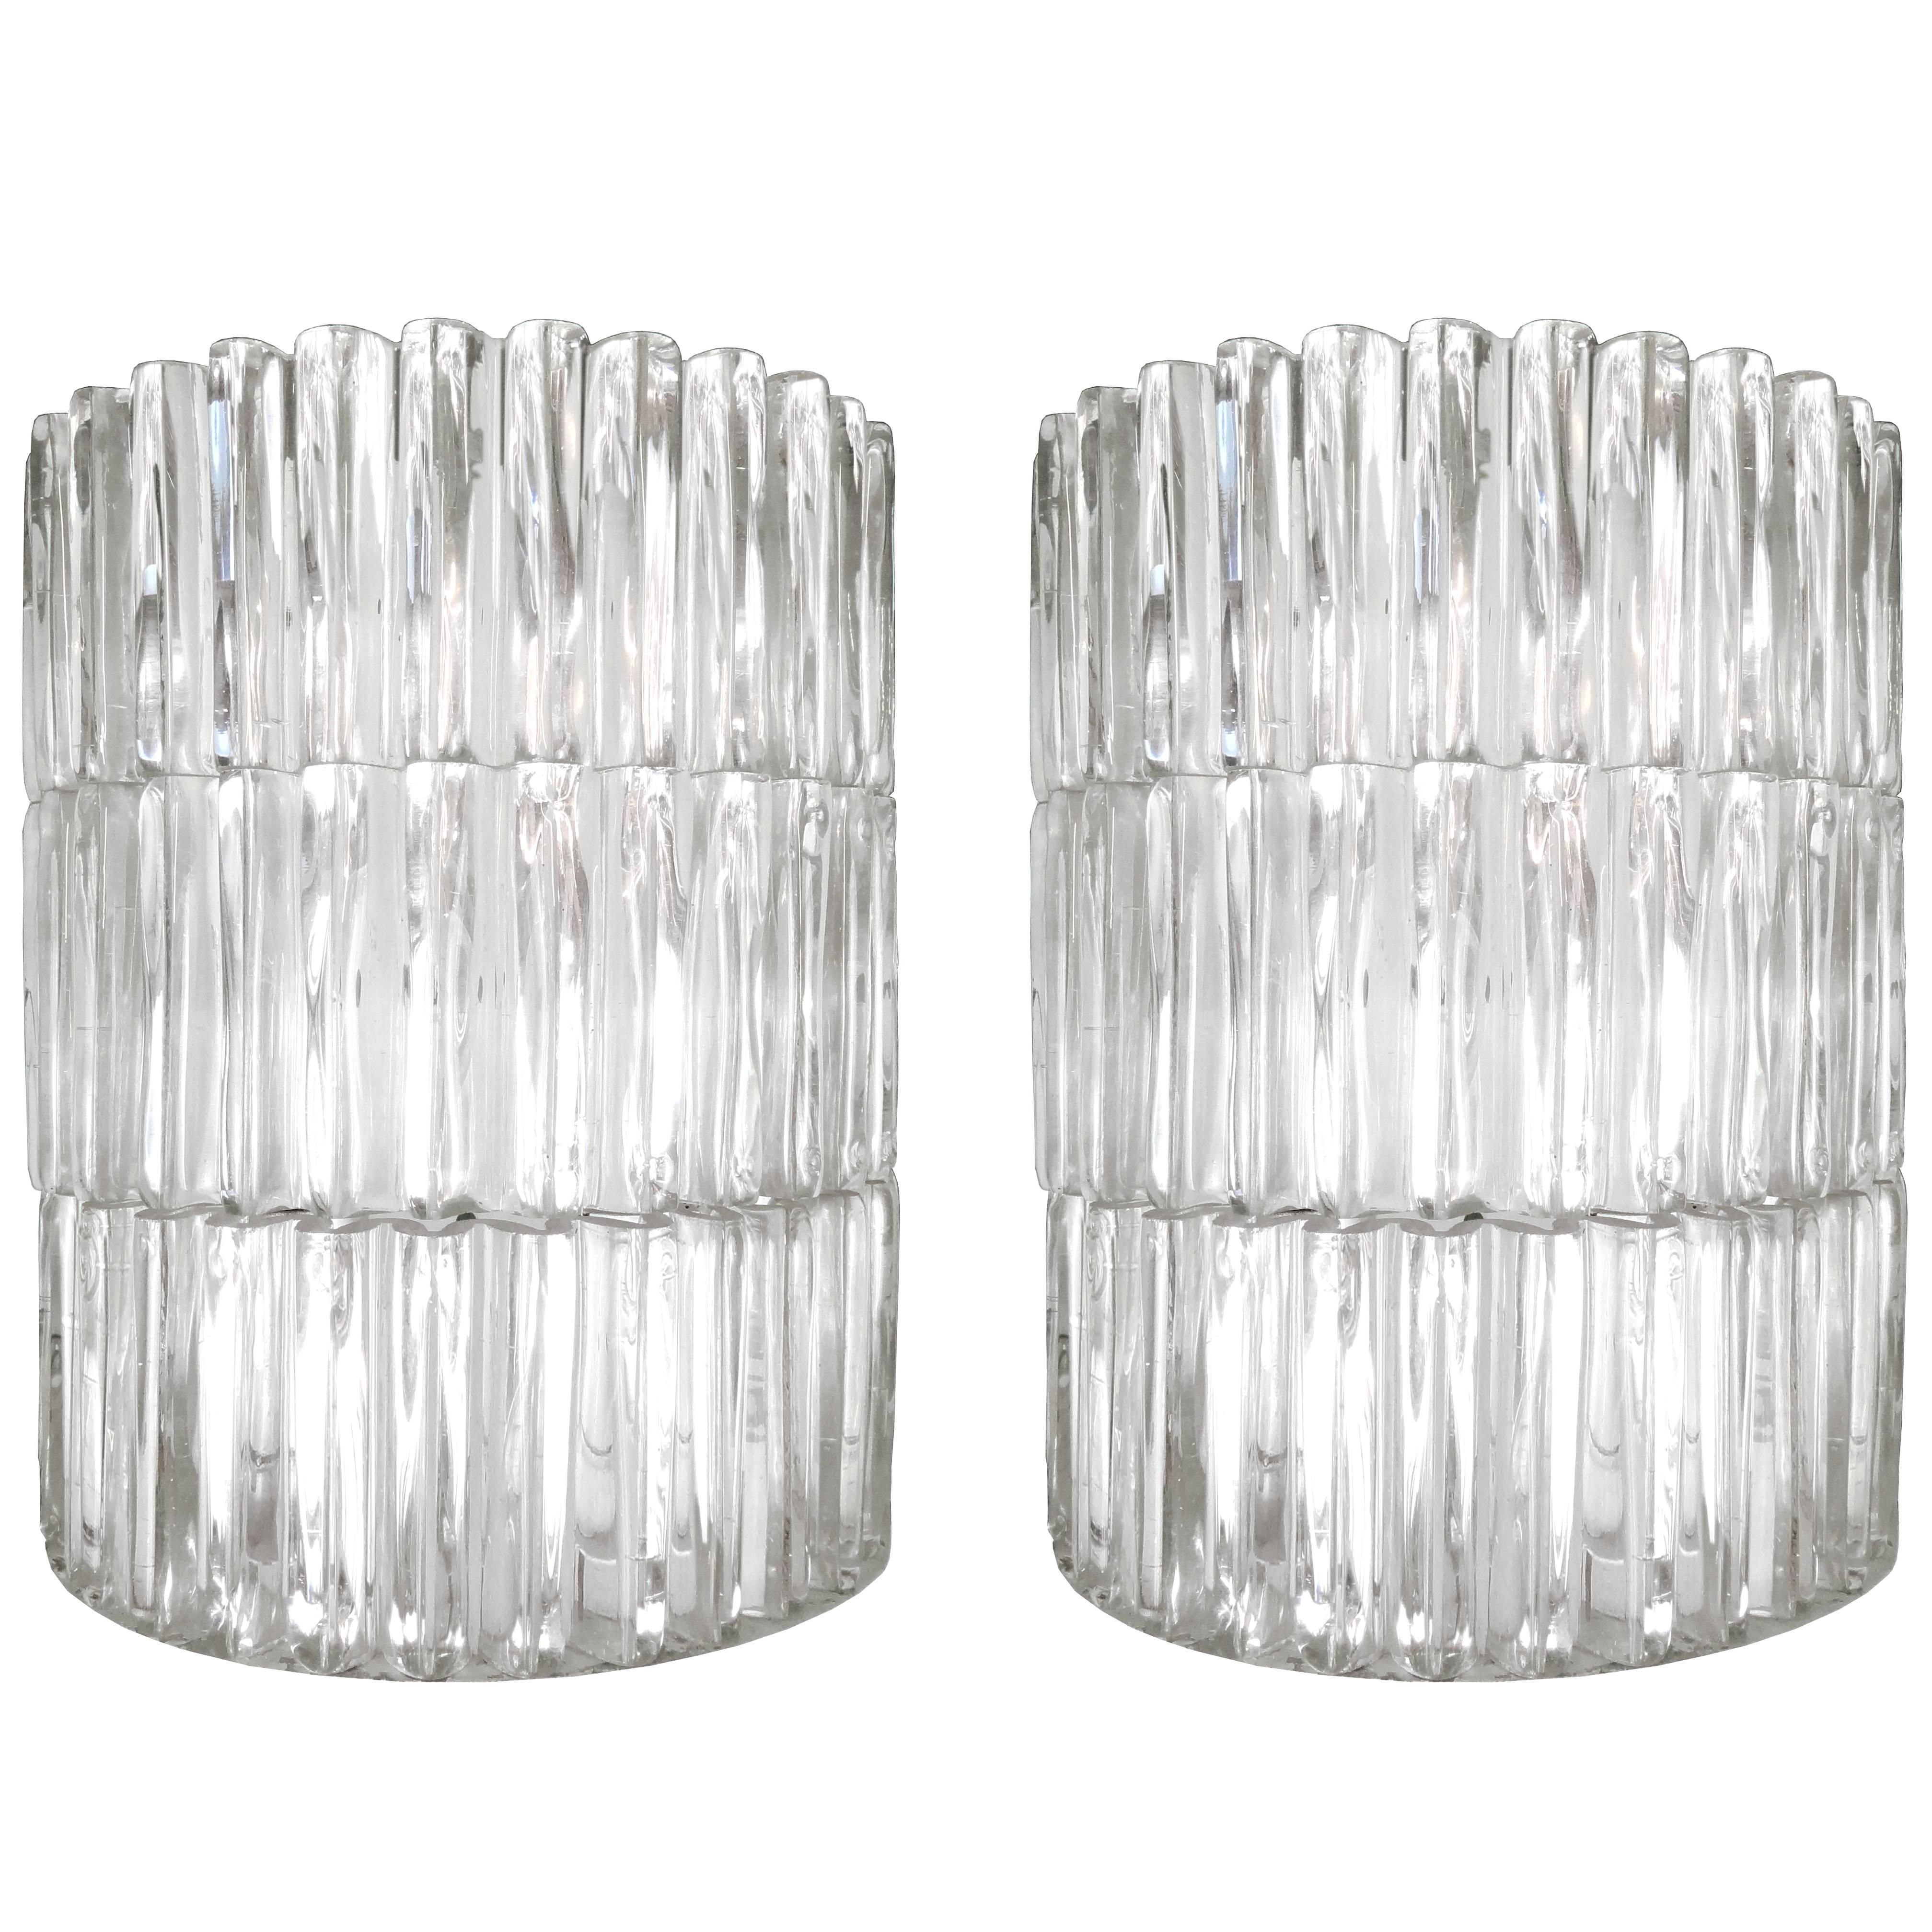 Pair of Fluted Glass Sconces Attributed to Hillebrand or Kaiser For Sale